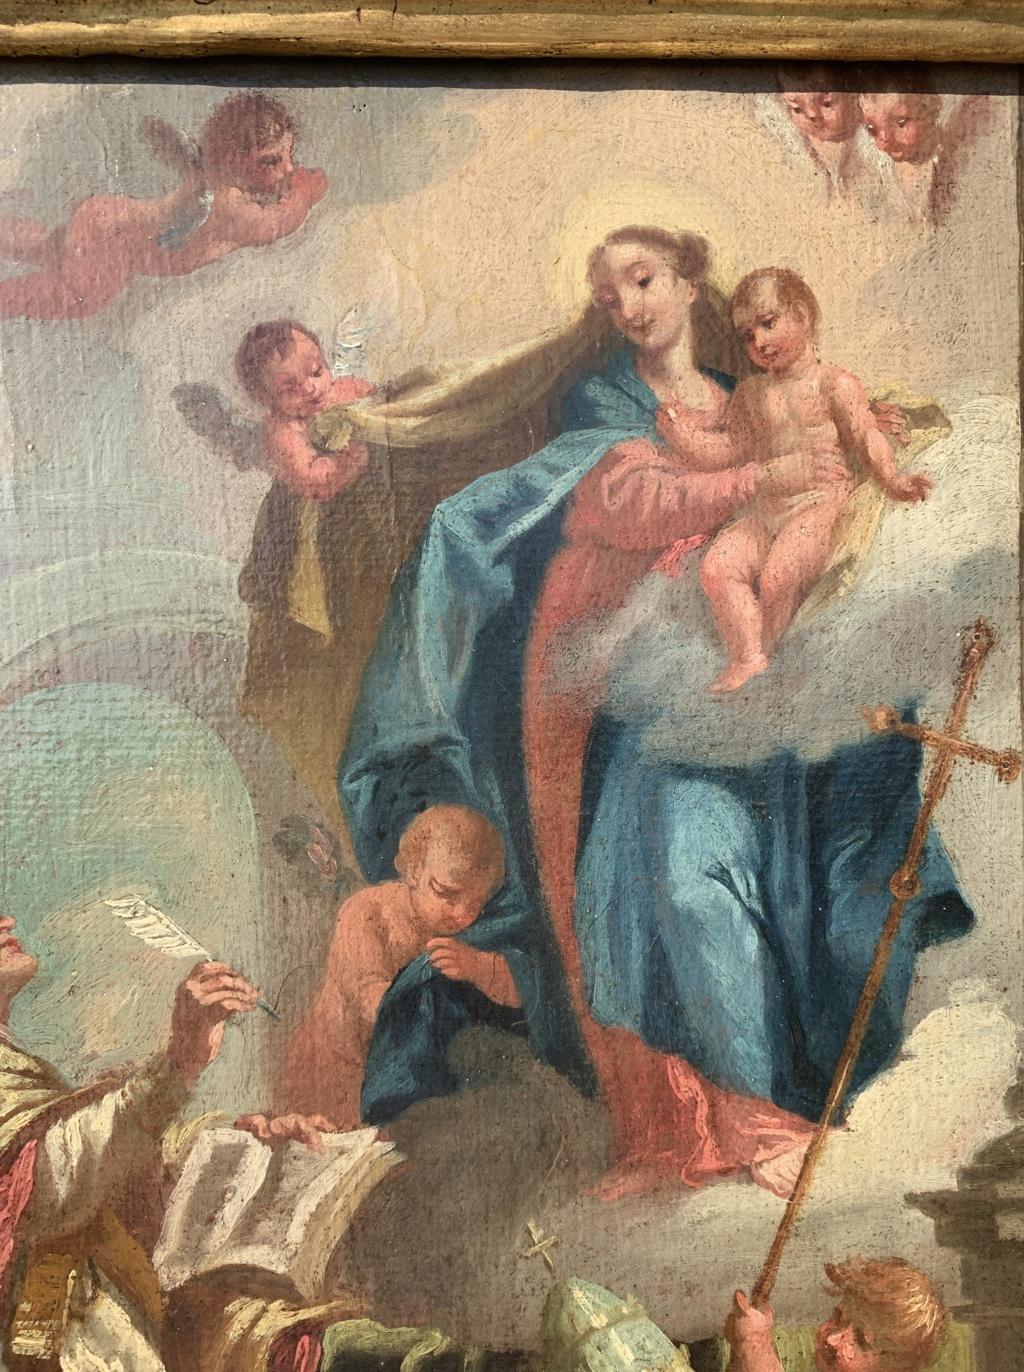 Venetian painter (18th century) - Madonna with Child, adoring saint and cherubs.

40 x 27.5 cm without frame, 51.5 x 40 cm with frame.

Antique oil painting on canvas, in an antique lacquered wooden frame.

Condition report: Original canvas. Good